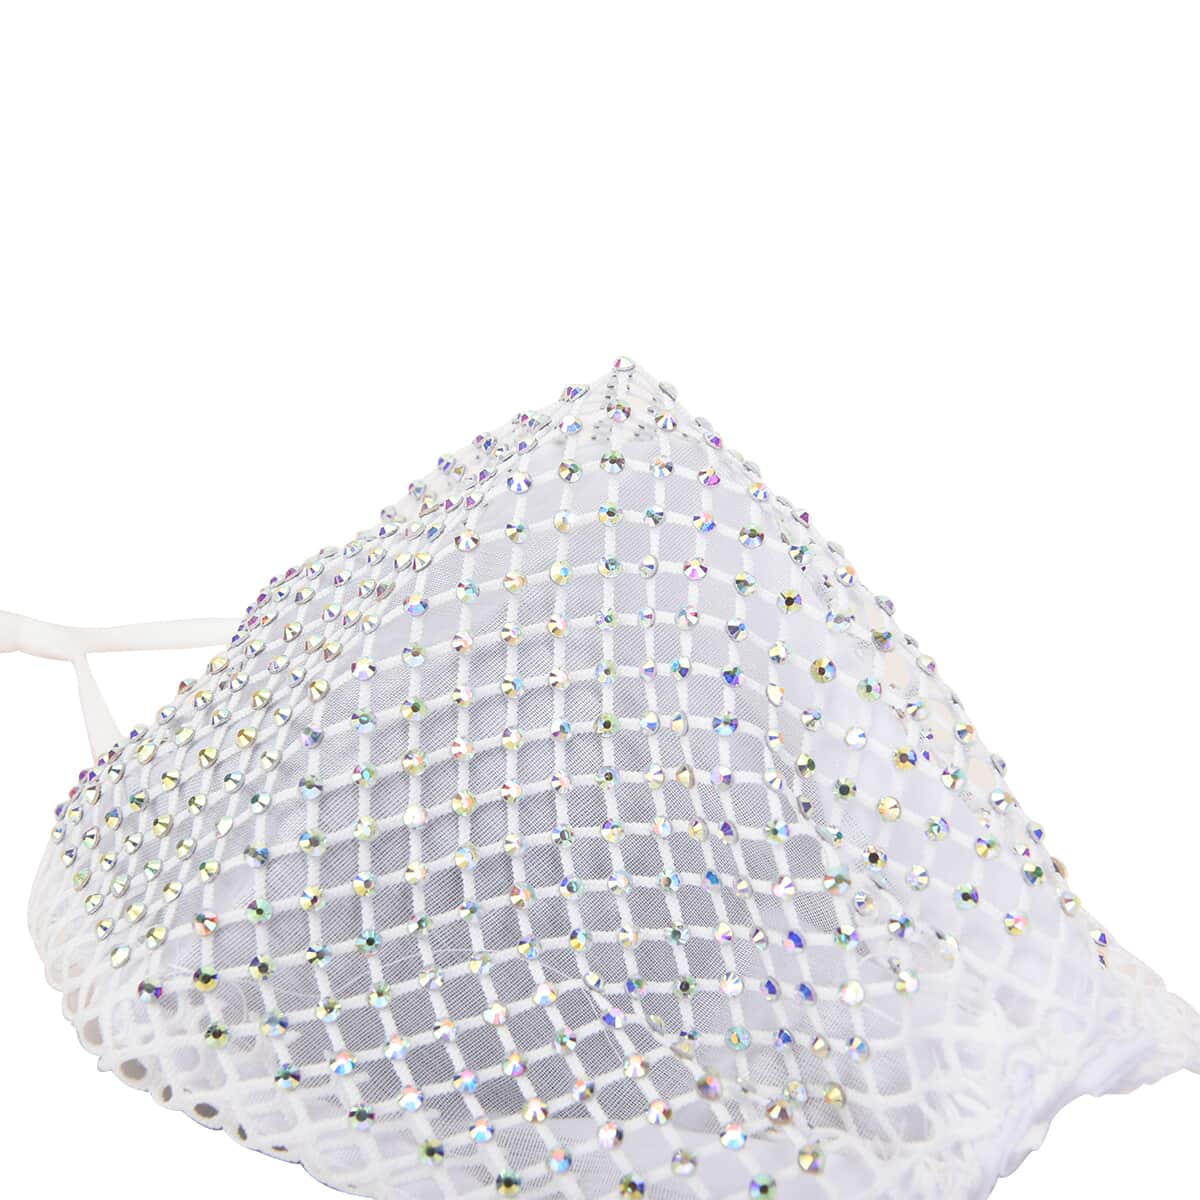 White Mesh with Sparkling Color Crystals Rhinestone 2 Ply Fashion Mask (Non-Returnable) image number 4